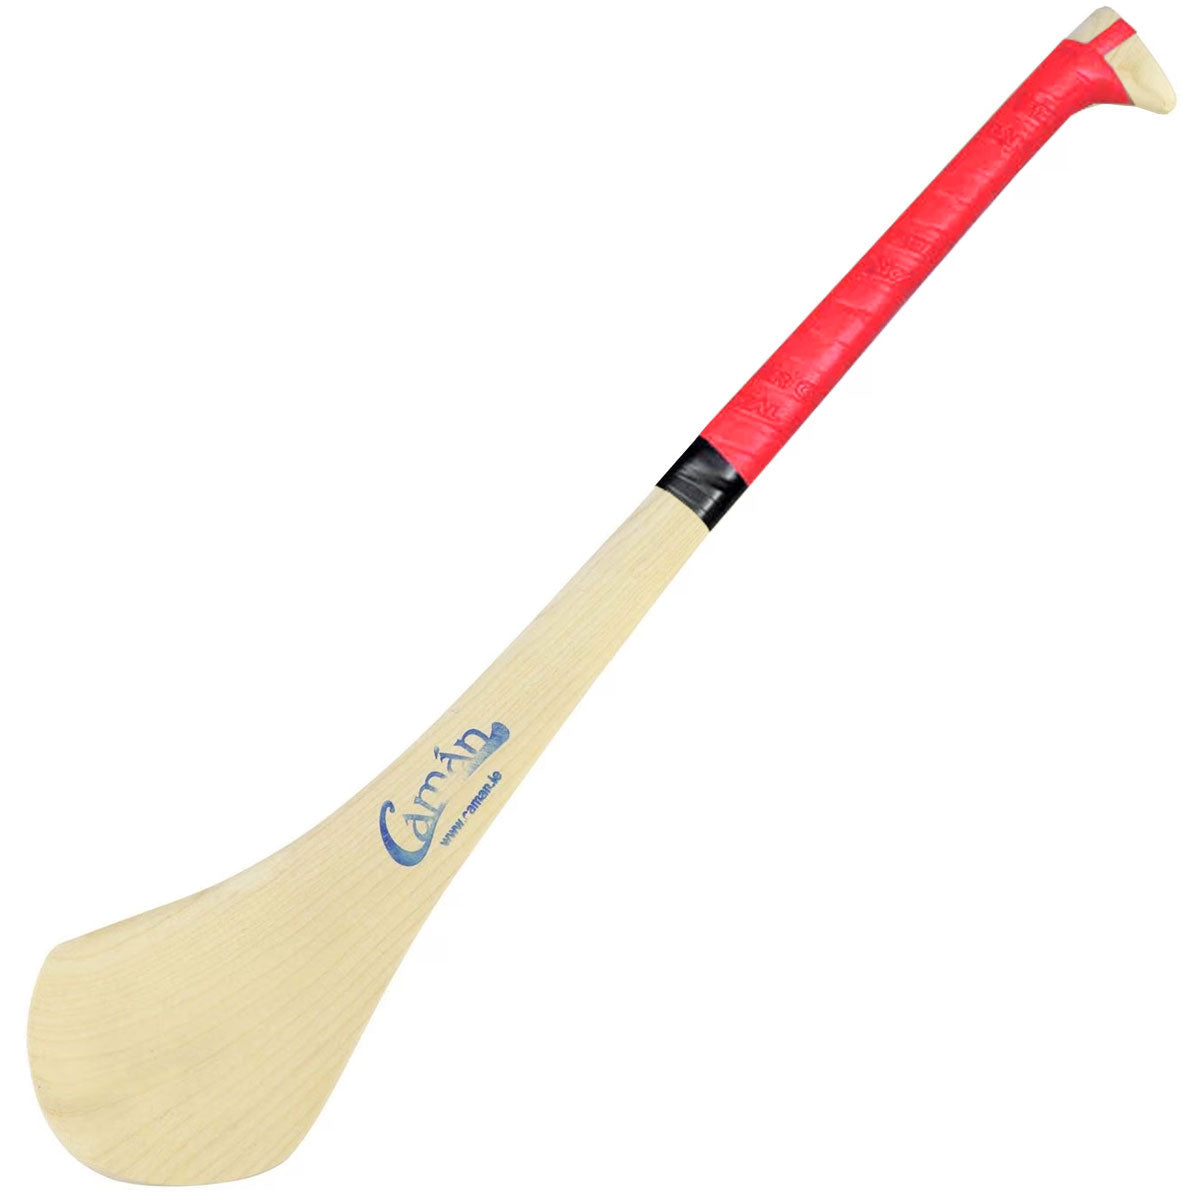 Caman Hurling Stick size 22 (Inches)